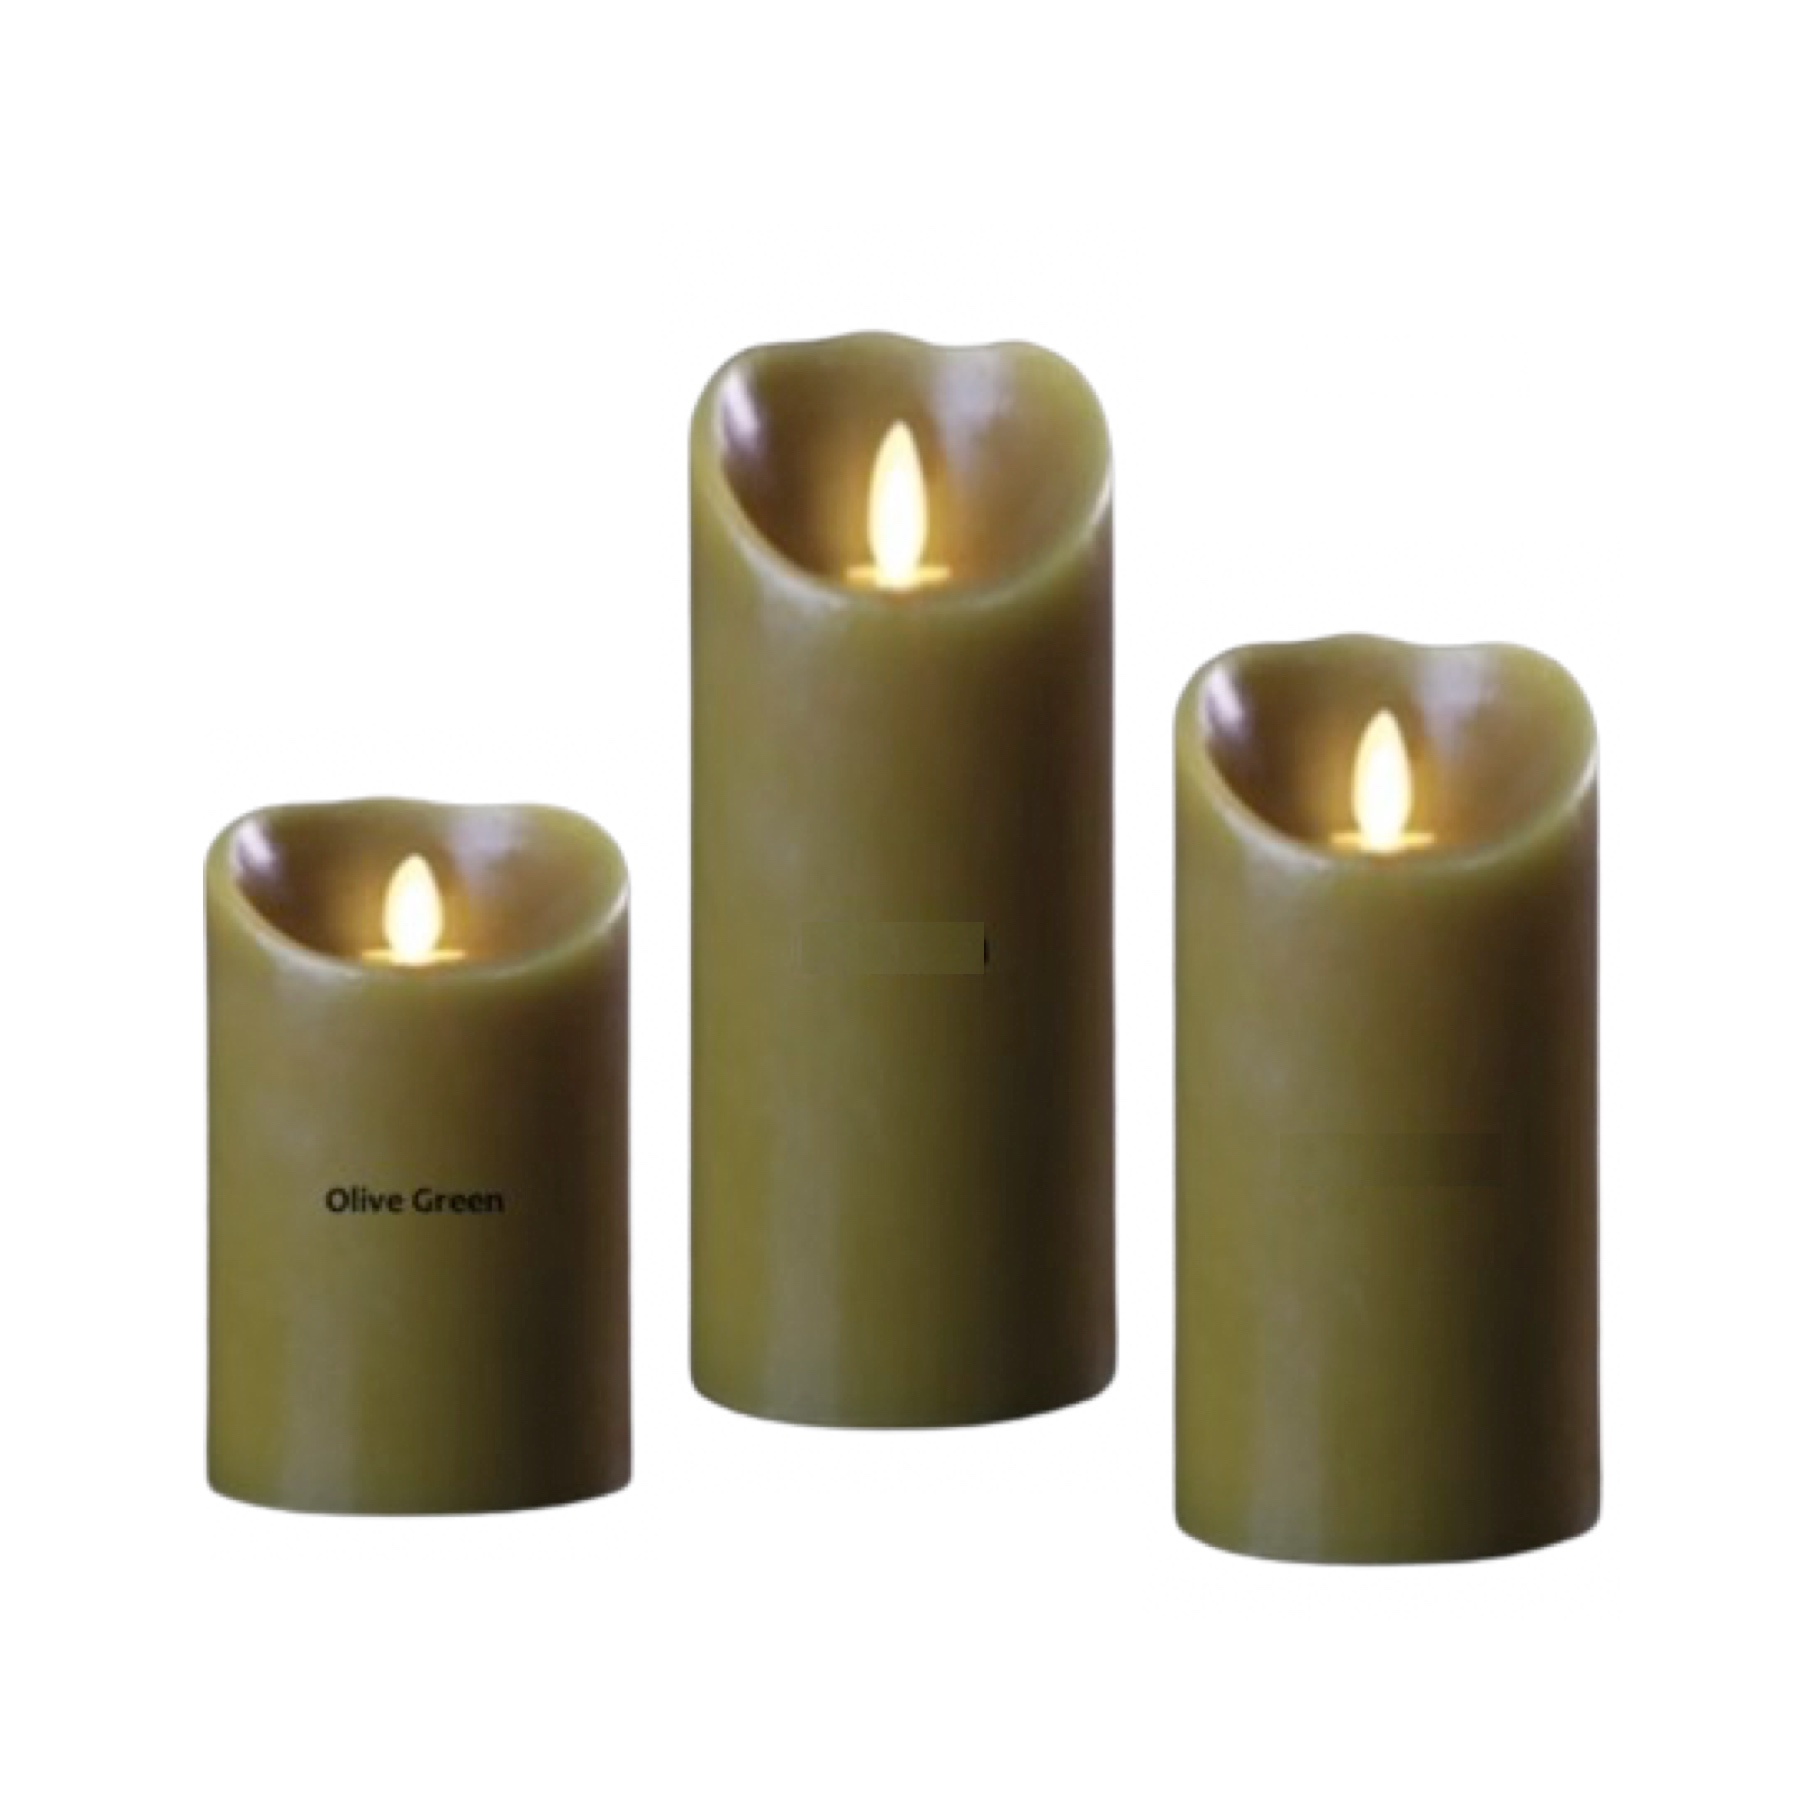 C-TR95002 Smart Candles